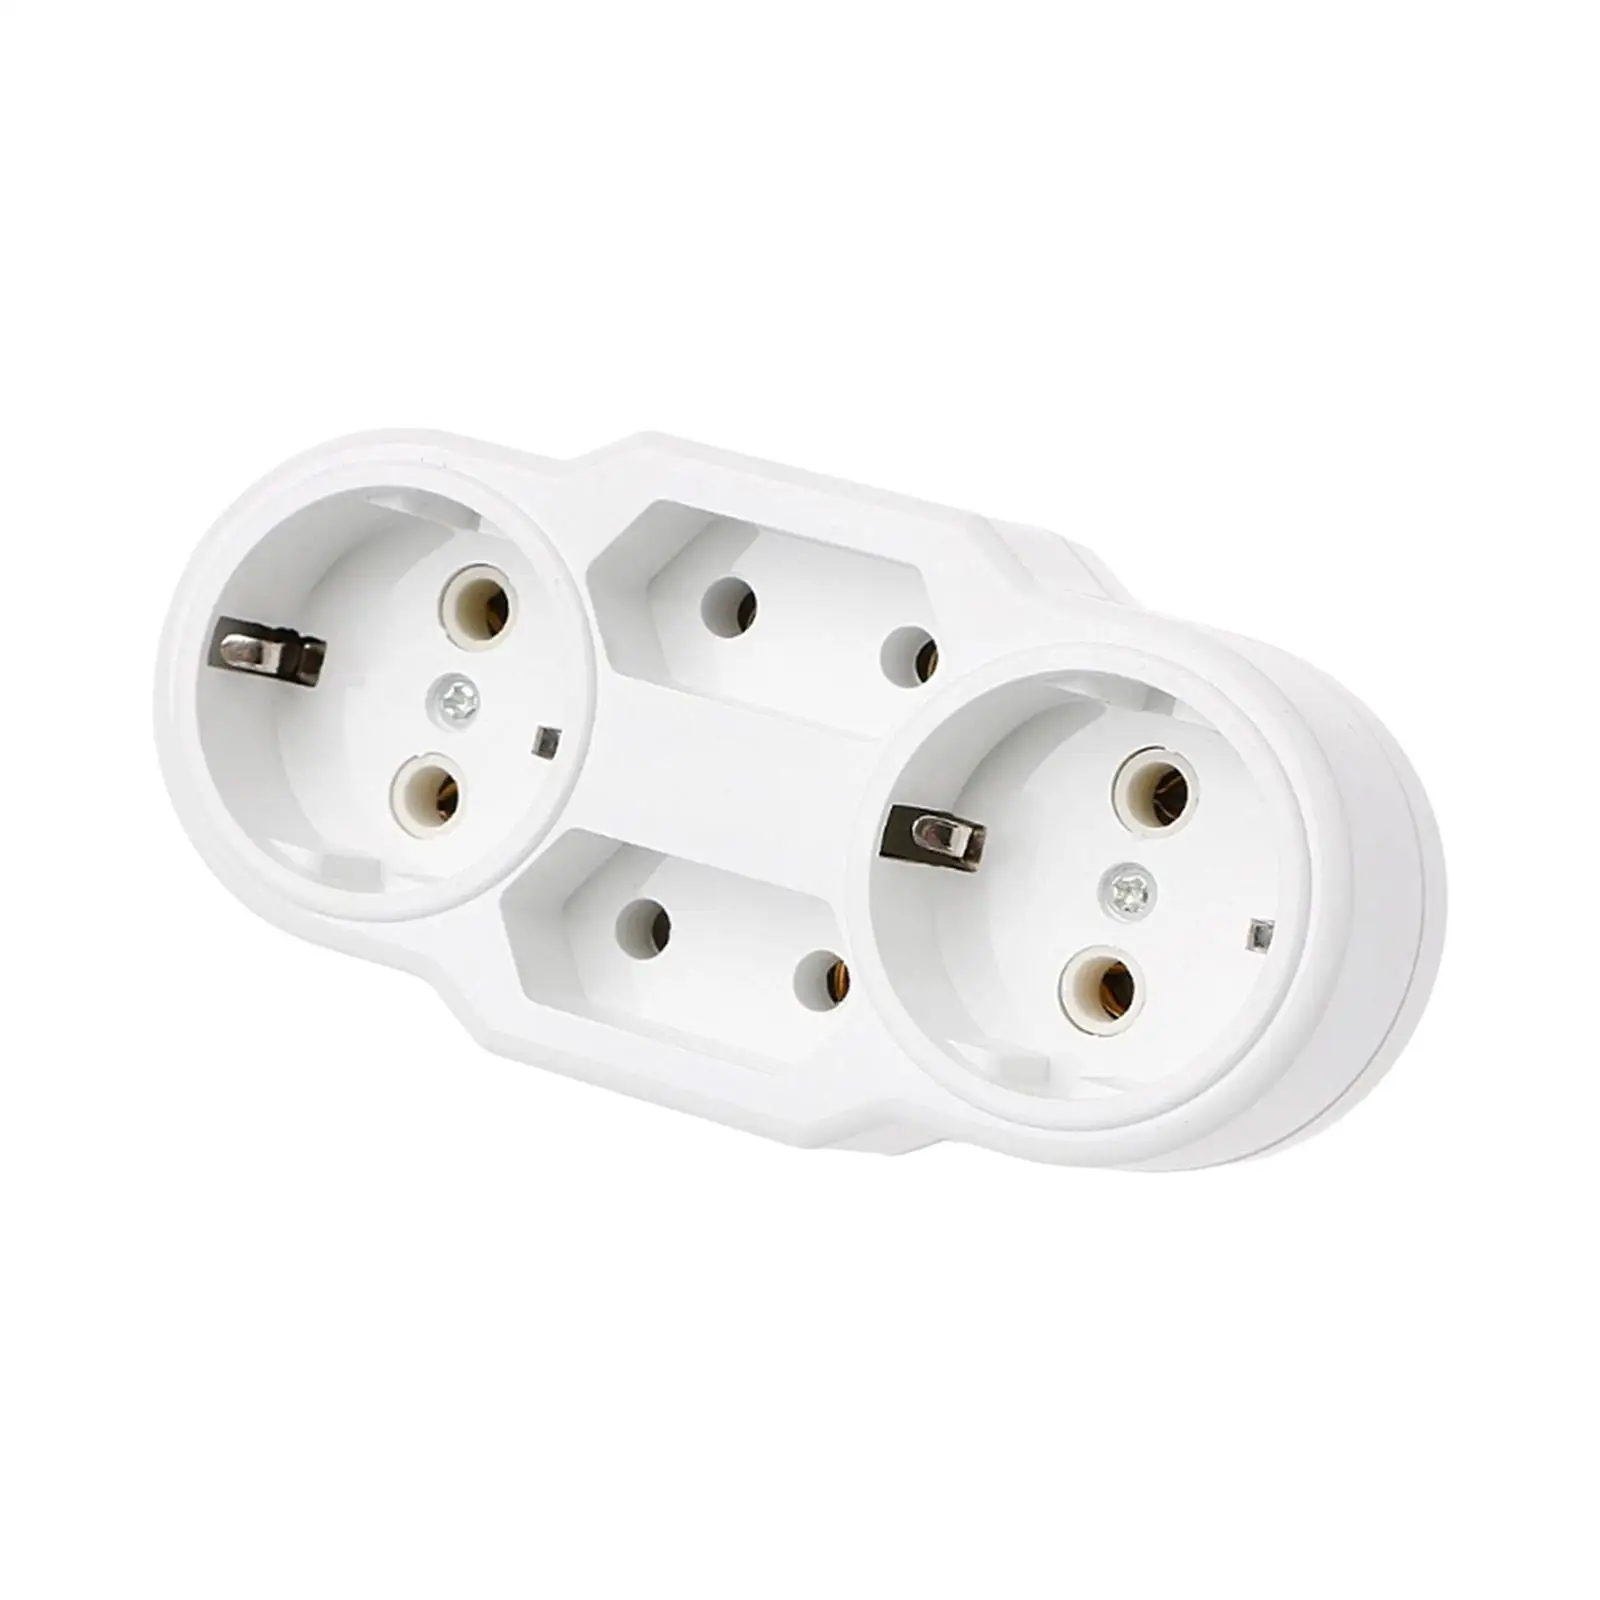 1 to 4 Way Russia Multiple Conversion Socket Plug Adapter Lightweight Converter Socket Compect Portable for travel Home